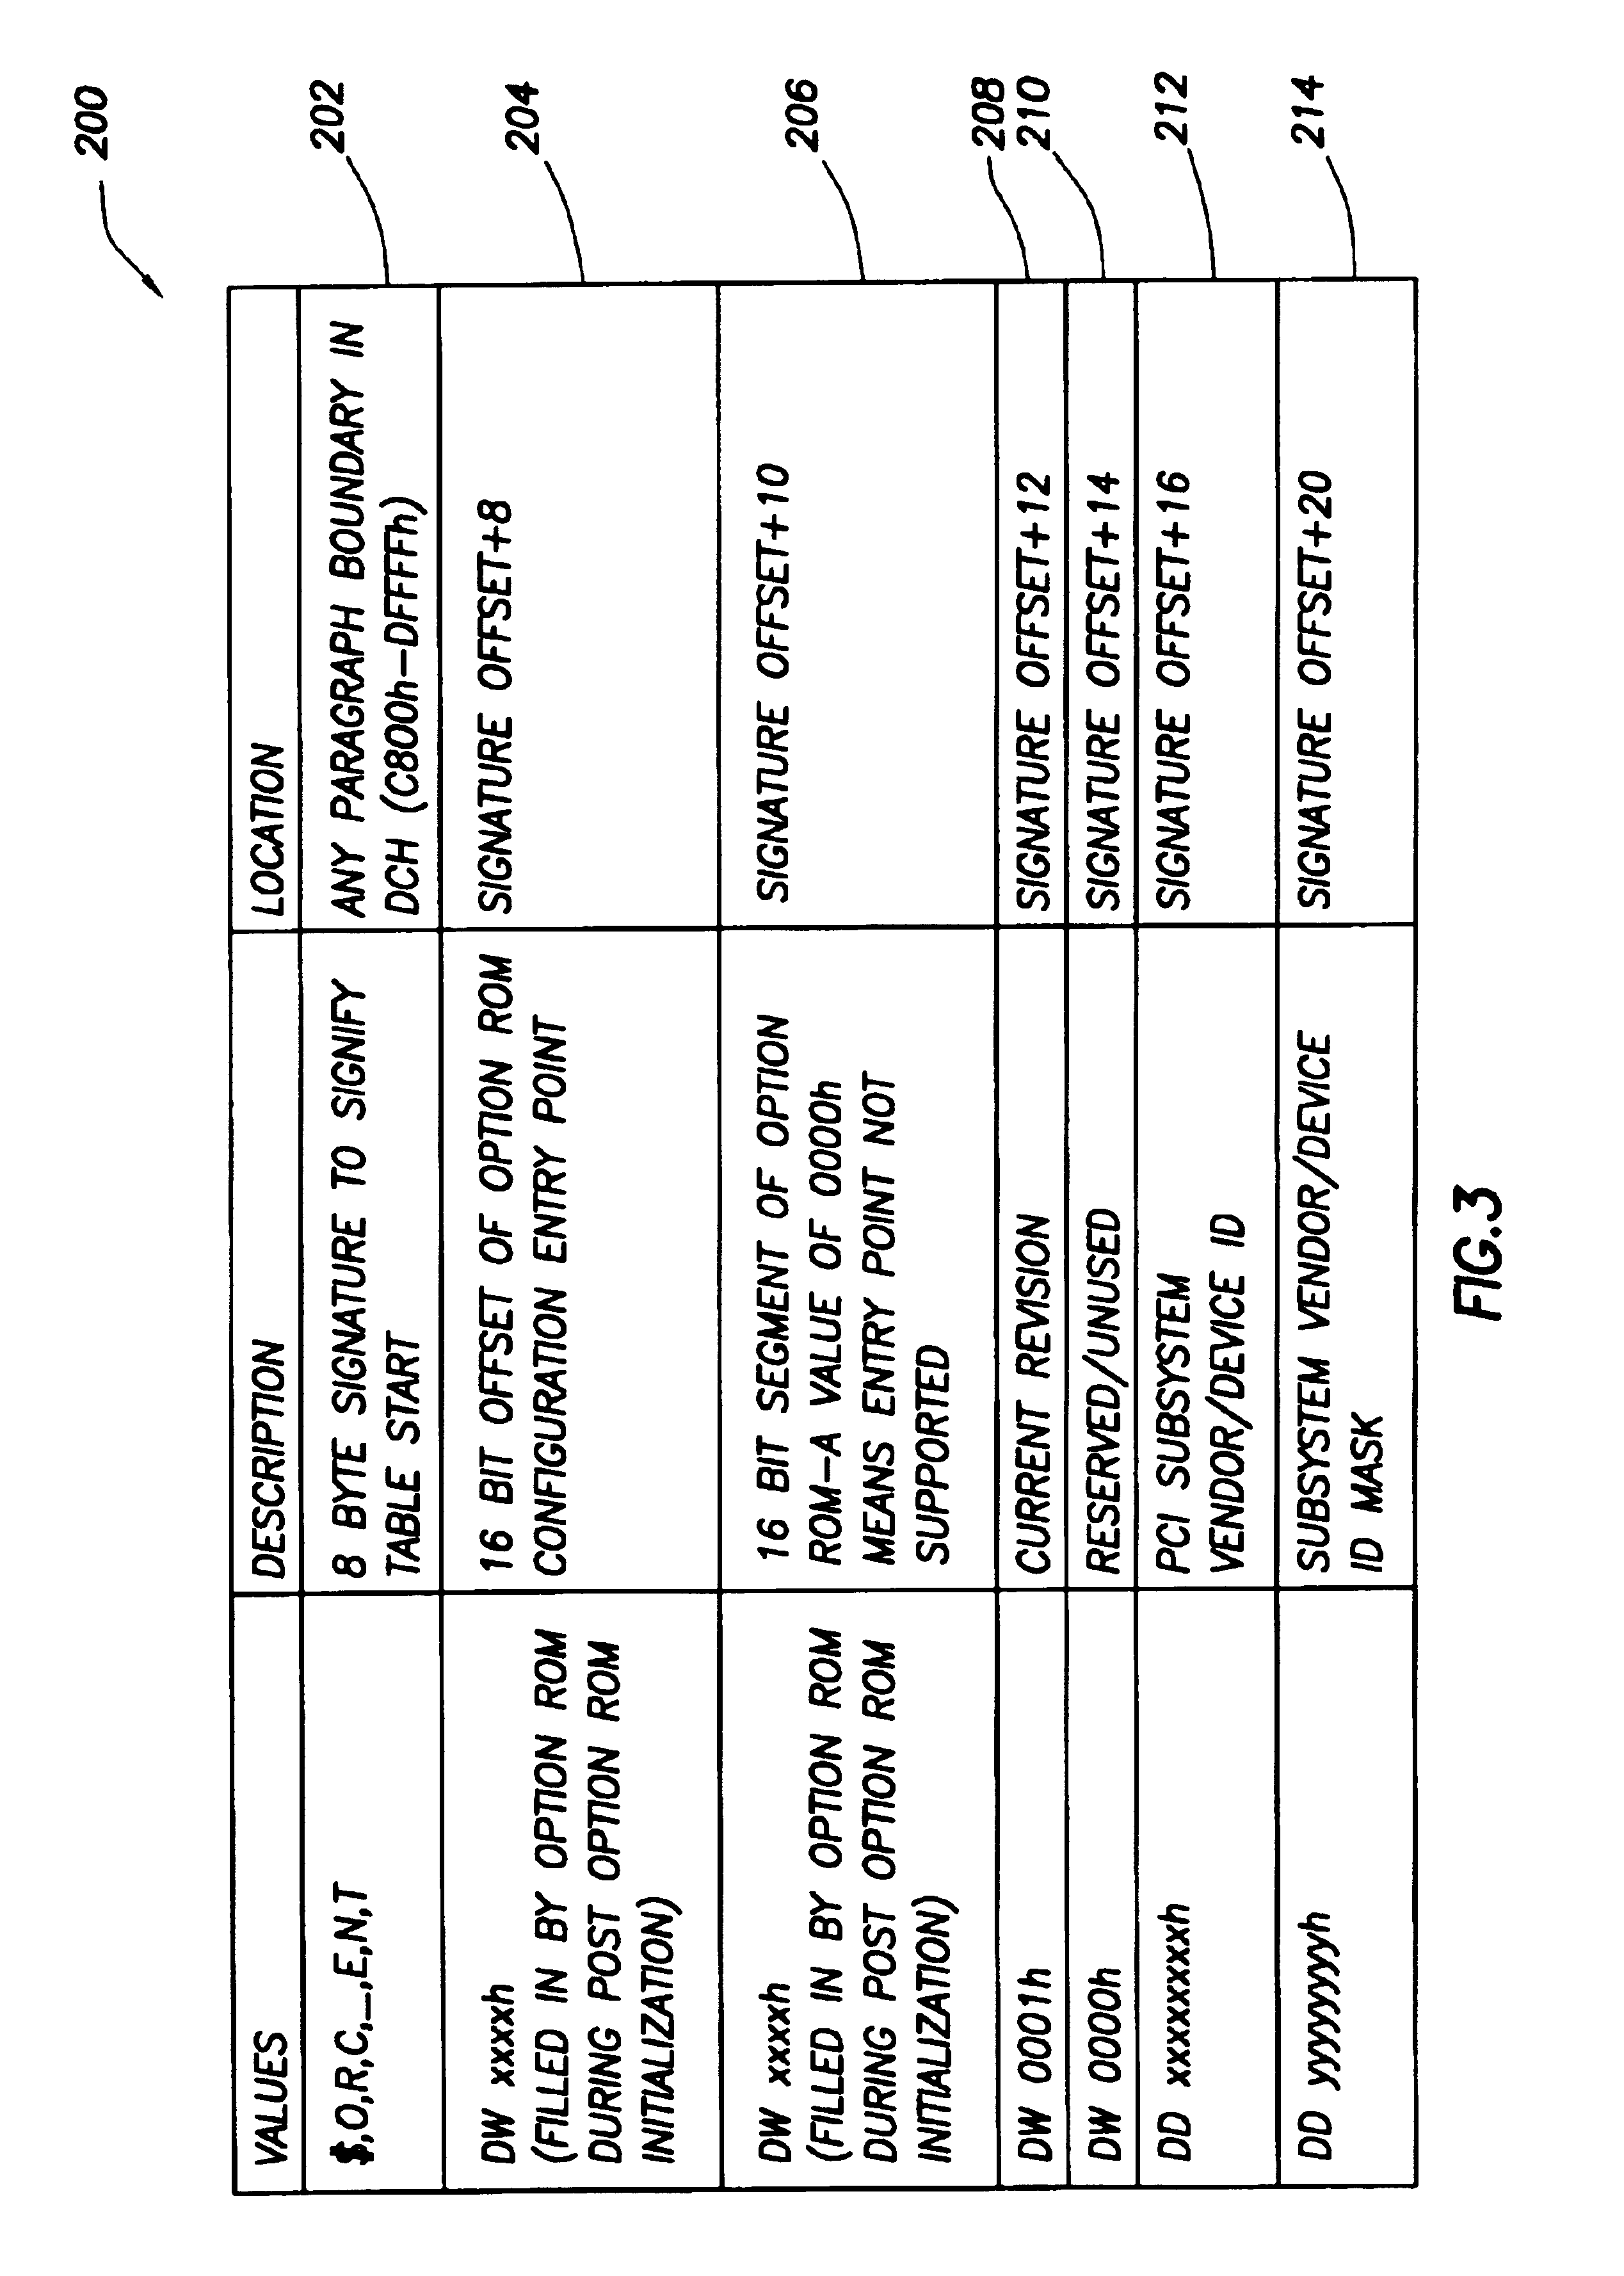 Method for expansion and integration of option ROM support utilities for run-time/boot-time usage